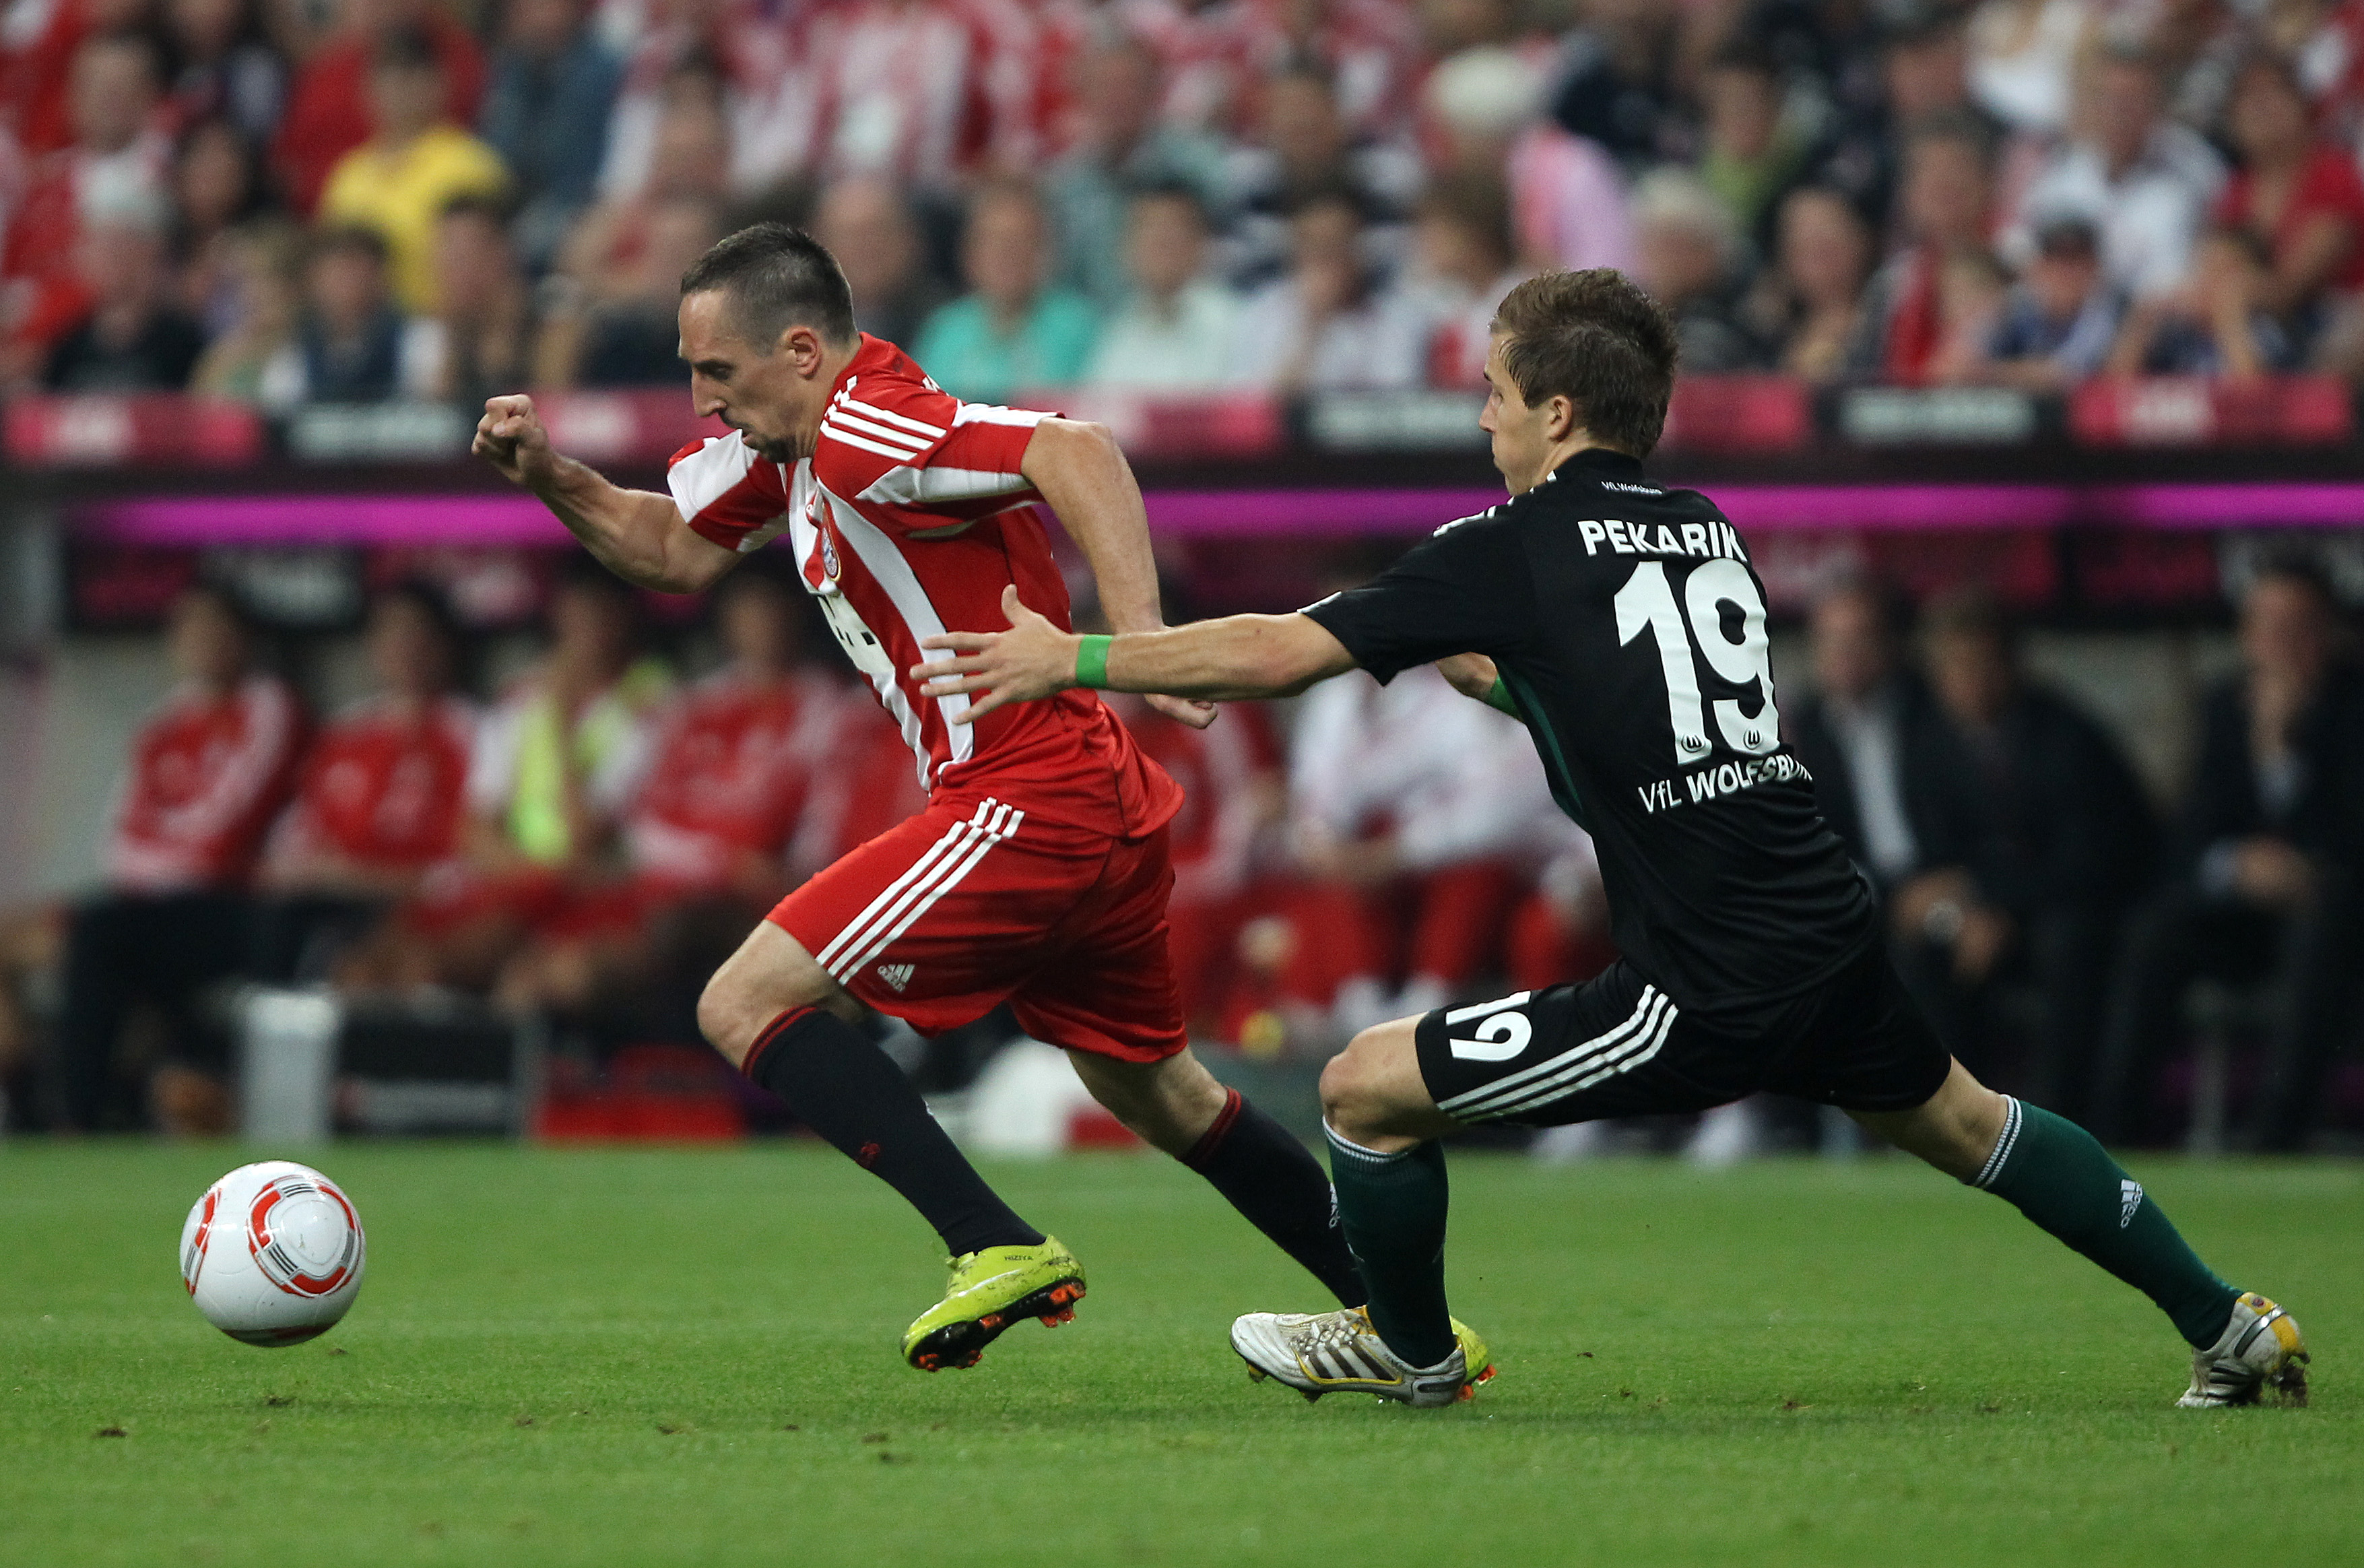 MUNICH, GERMANY - AUGUST 20:  Franck Ribery of Bayern is chased by Peter Pekarik of Wolfsburg during the Bundesliga match between FC Bayern Muenchen and VfL Wolfsburg at Allianz Arena on August 20, 2010 in Munich, Germany.  (Photo by Clive Brunskill/Getty